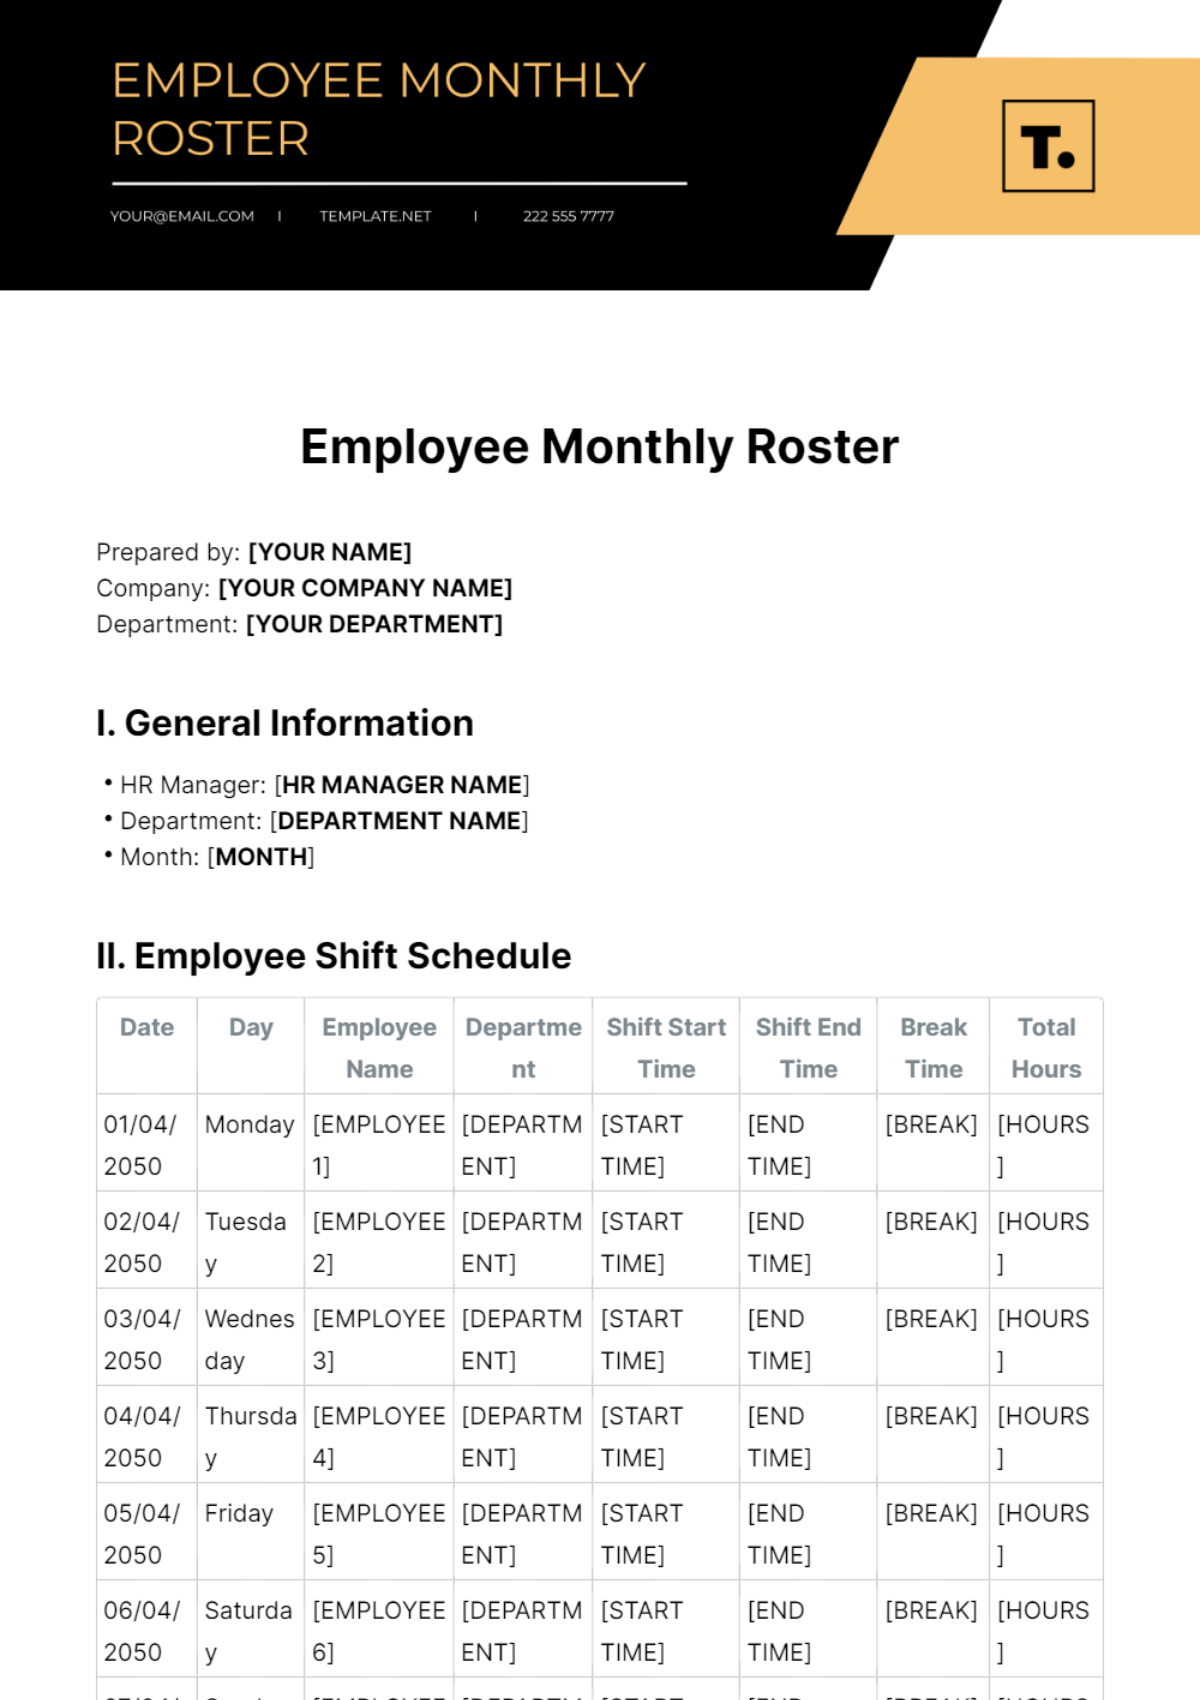 Employee Monthly Roster Template